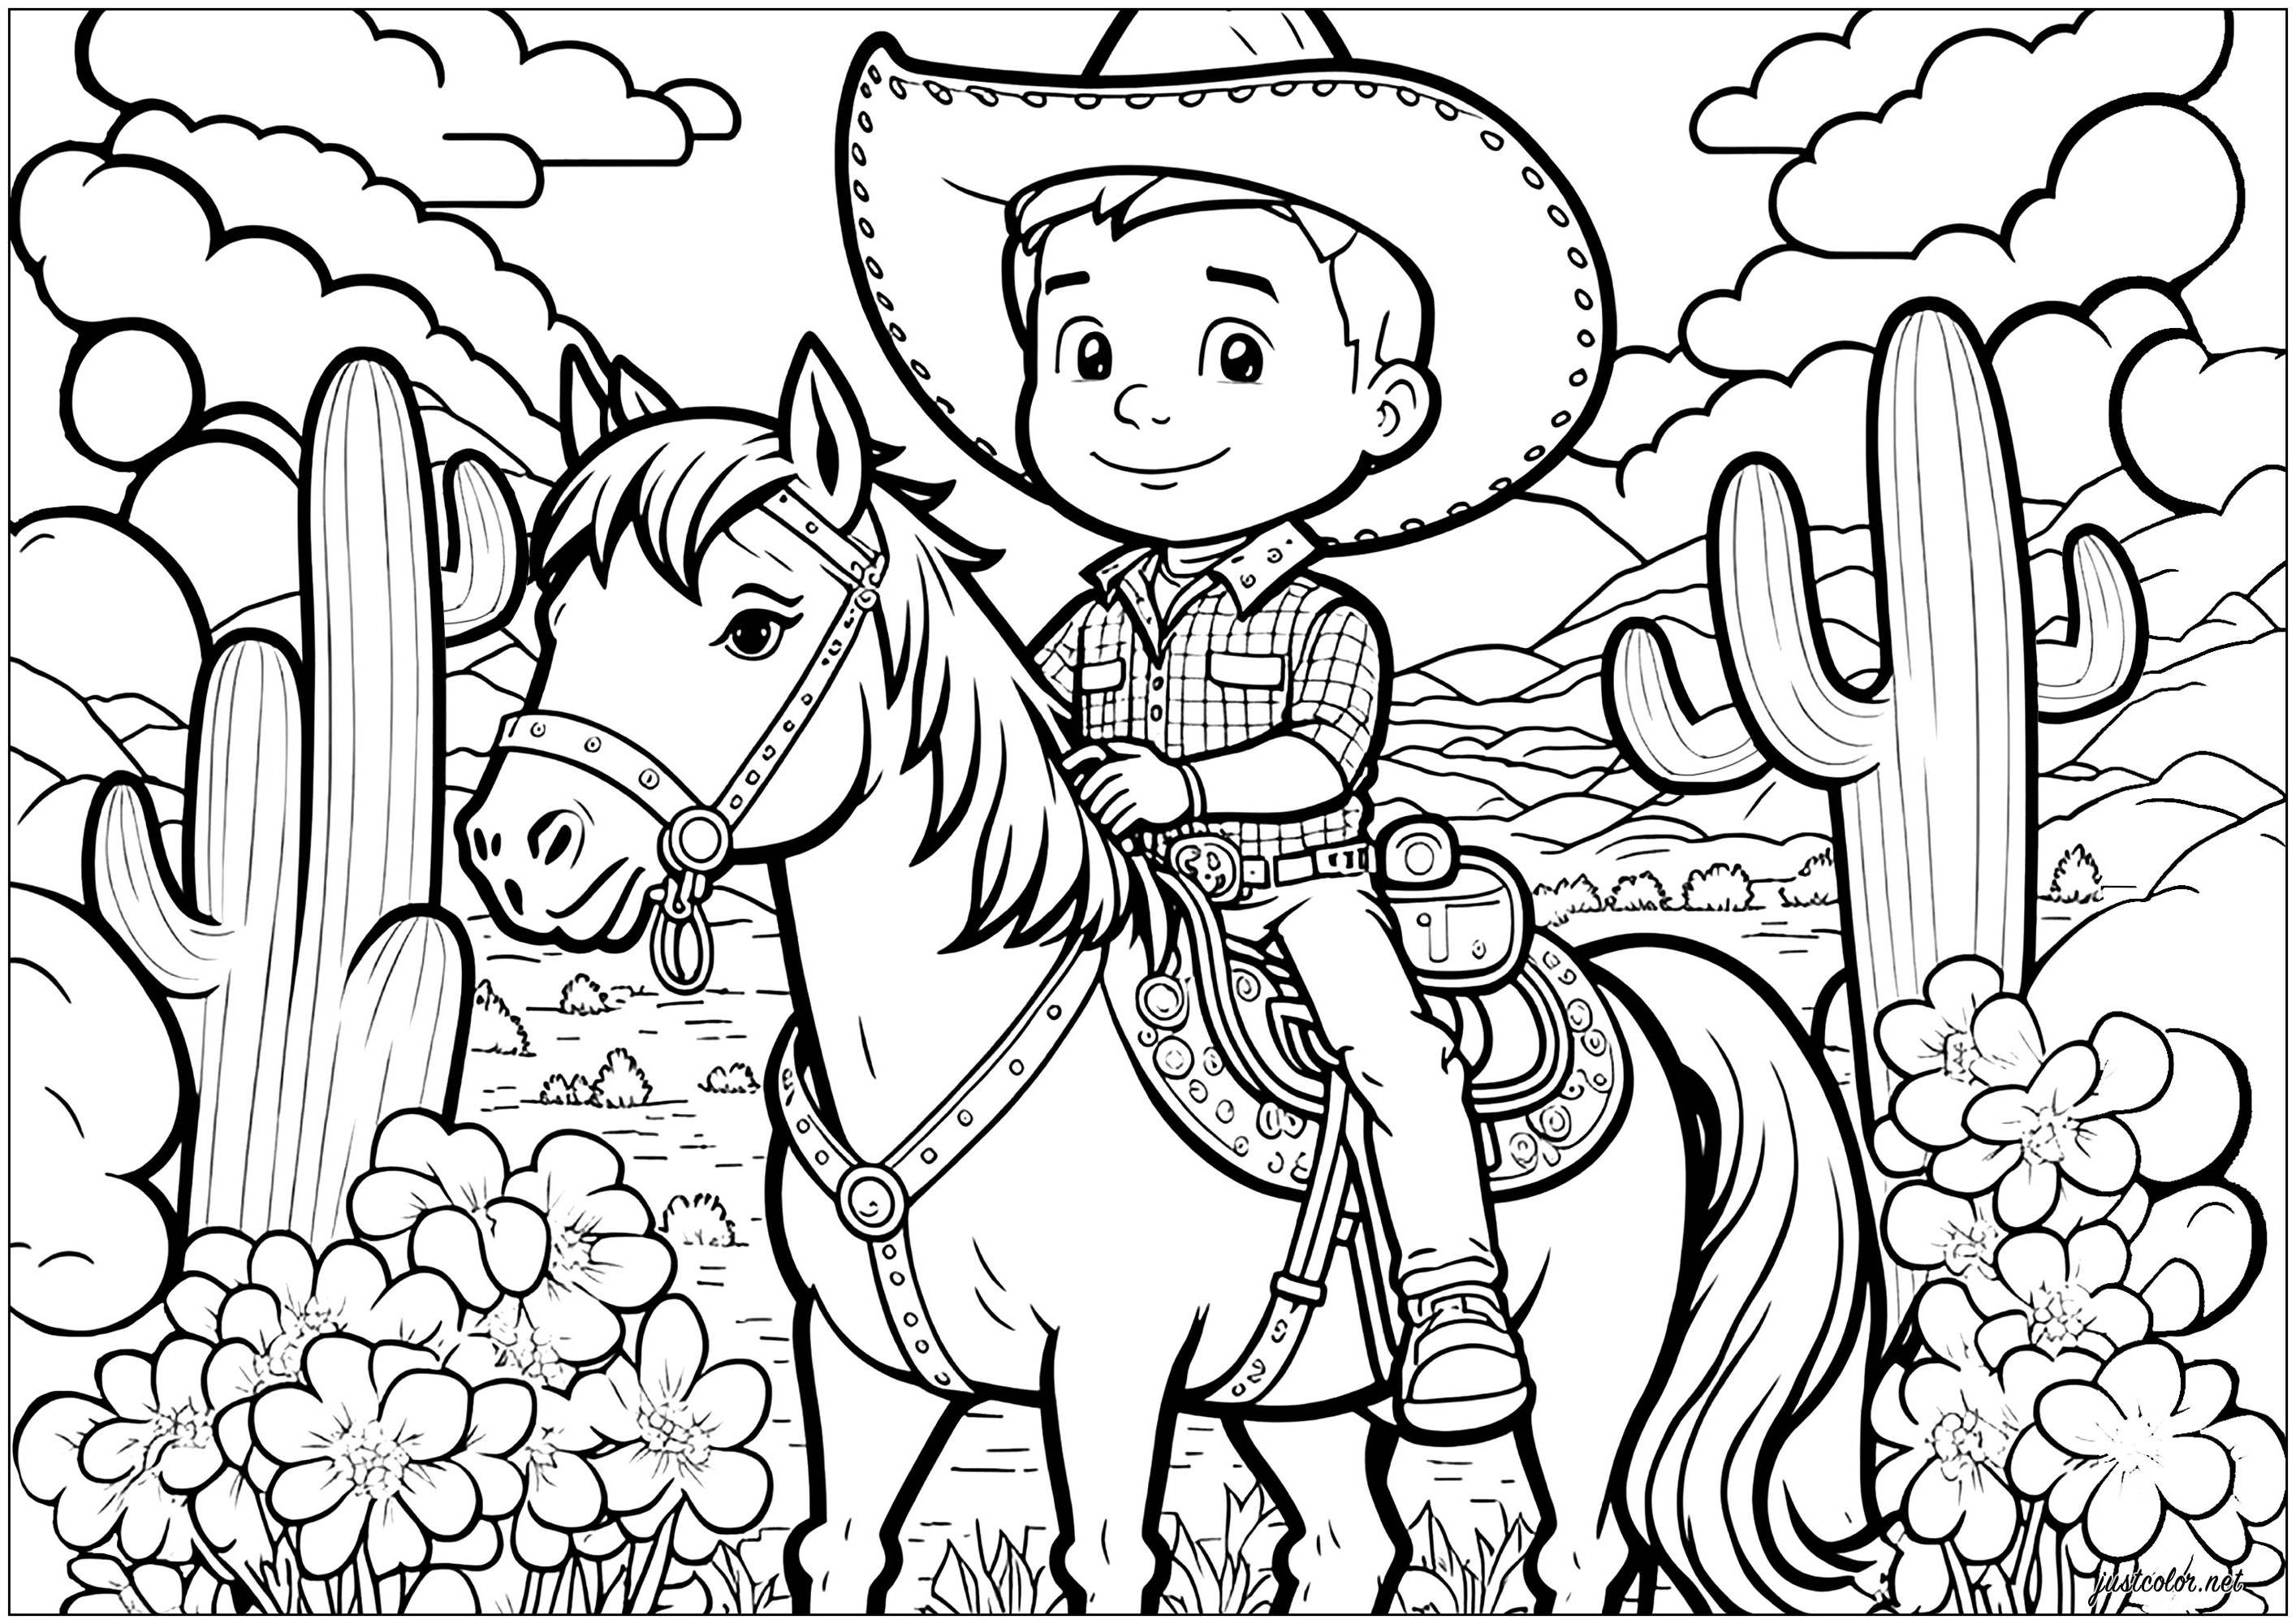 Color this Cowboy on his horse, with a background inspired by Westerns and Far West !. An assumed Cartoon-style coloring page, use your brightest and brightest colors !